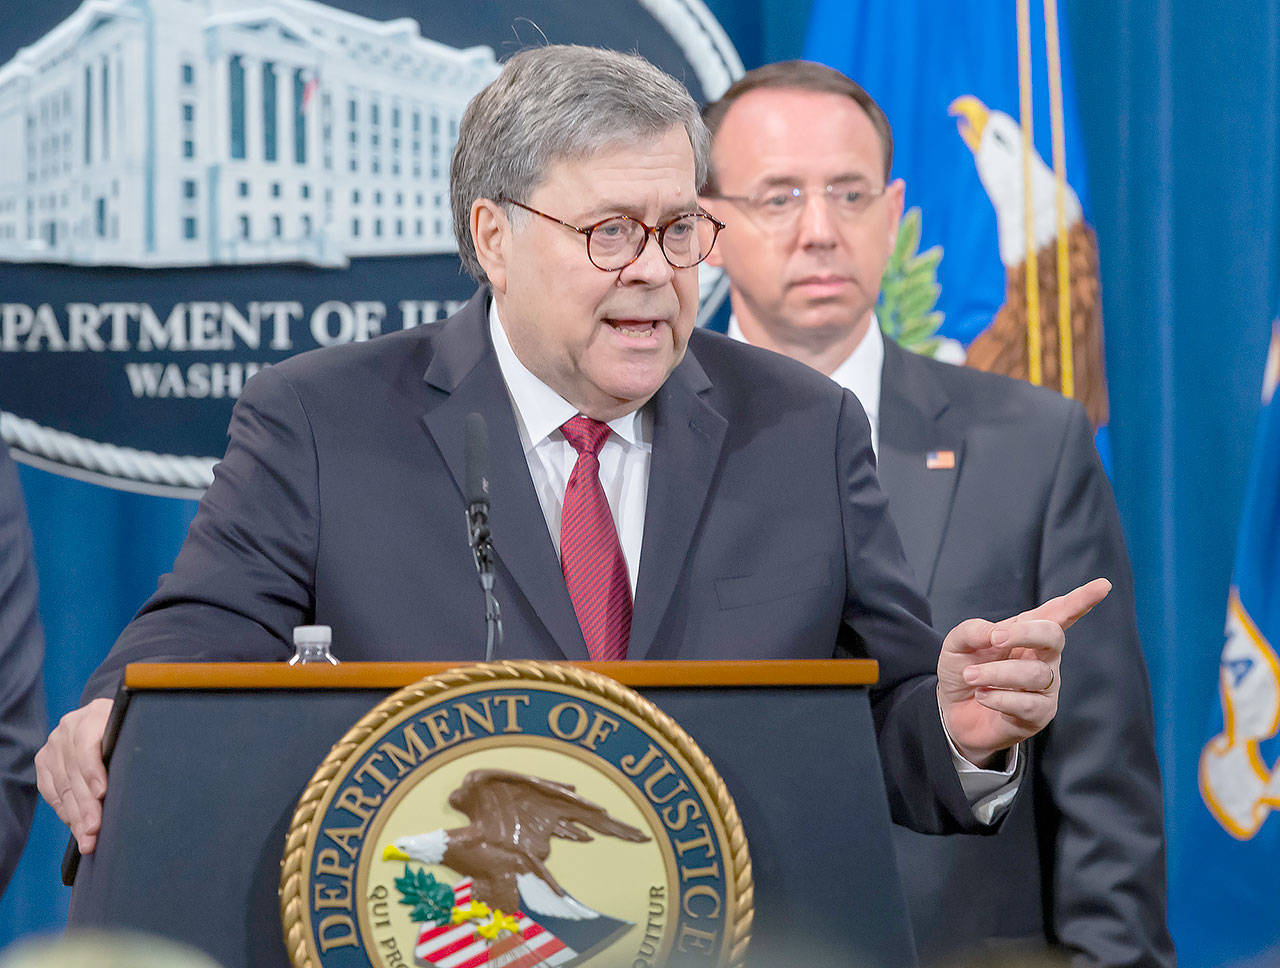 U.S. Attorney General William Barr, left, and Deputy Attorney General Rod Rosenstein hold a press conference at the U.S. Department of Justice on Thursday in Washington, D.C. The briefing came just before the release of a redacted version of Special Counsel Robert Mueller’s report on Russian interference in the 2016 election. (Sipa USA/TNS)